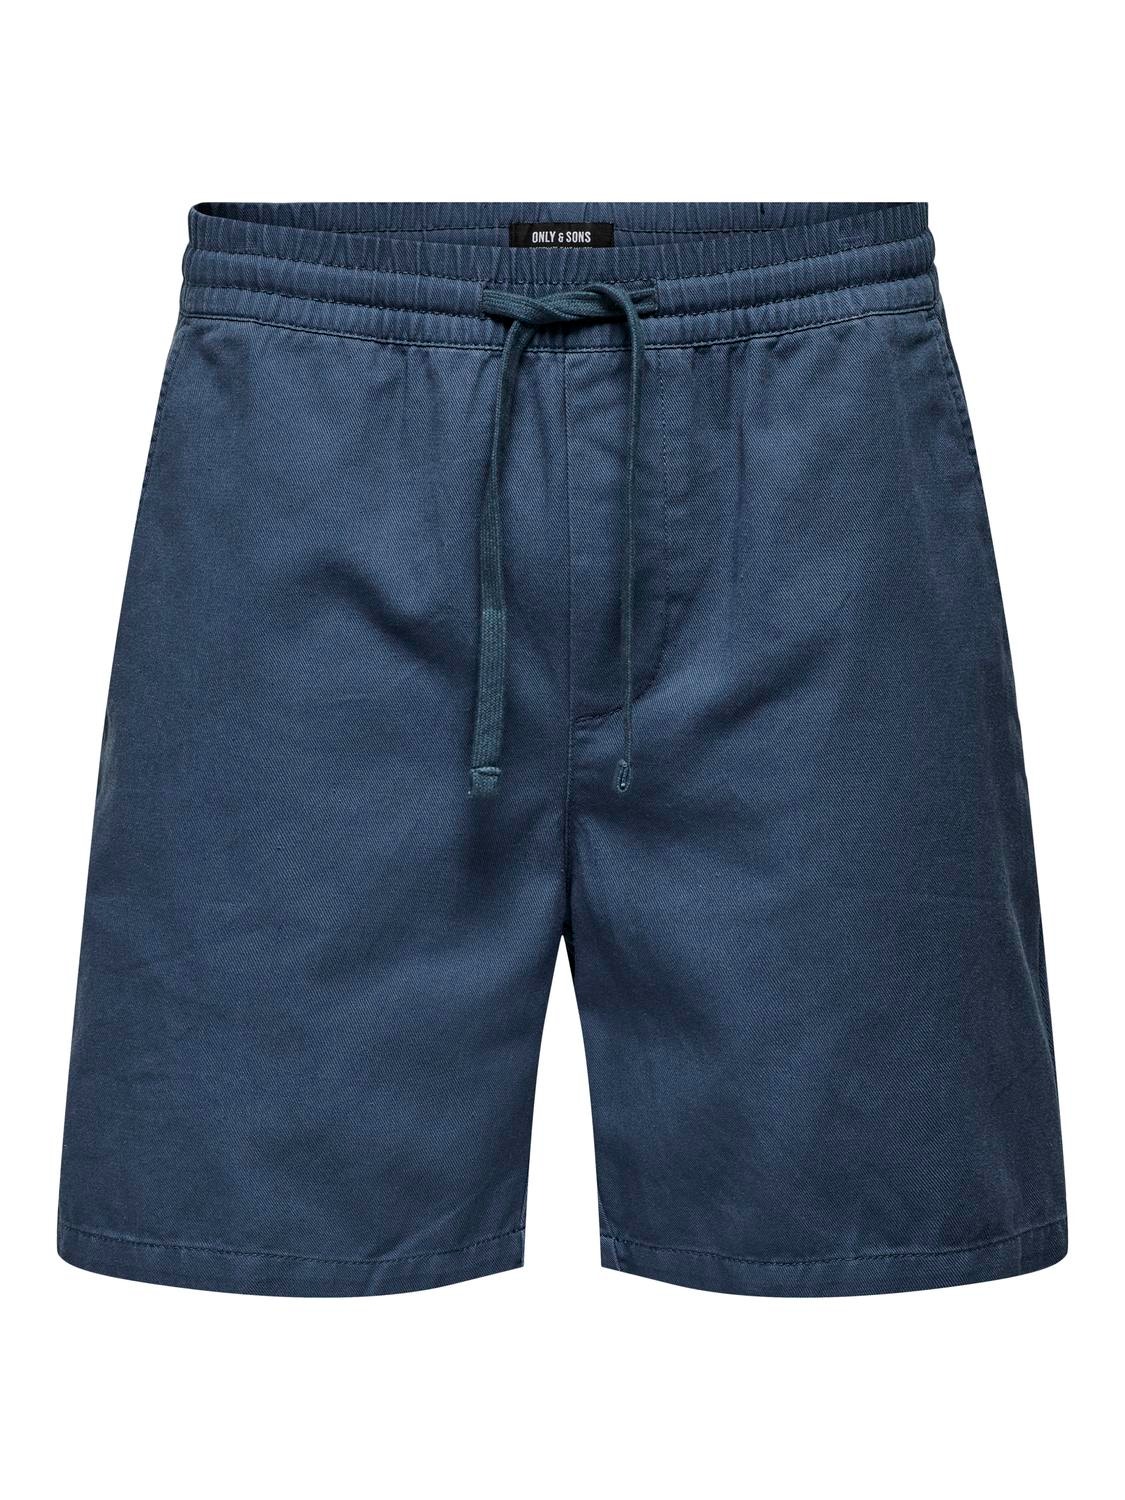 ONLY & SONS Shorts Corte regular Talle medio -Sargasso Sea - 22025790